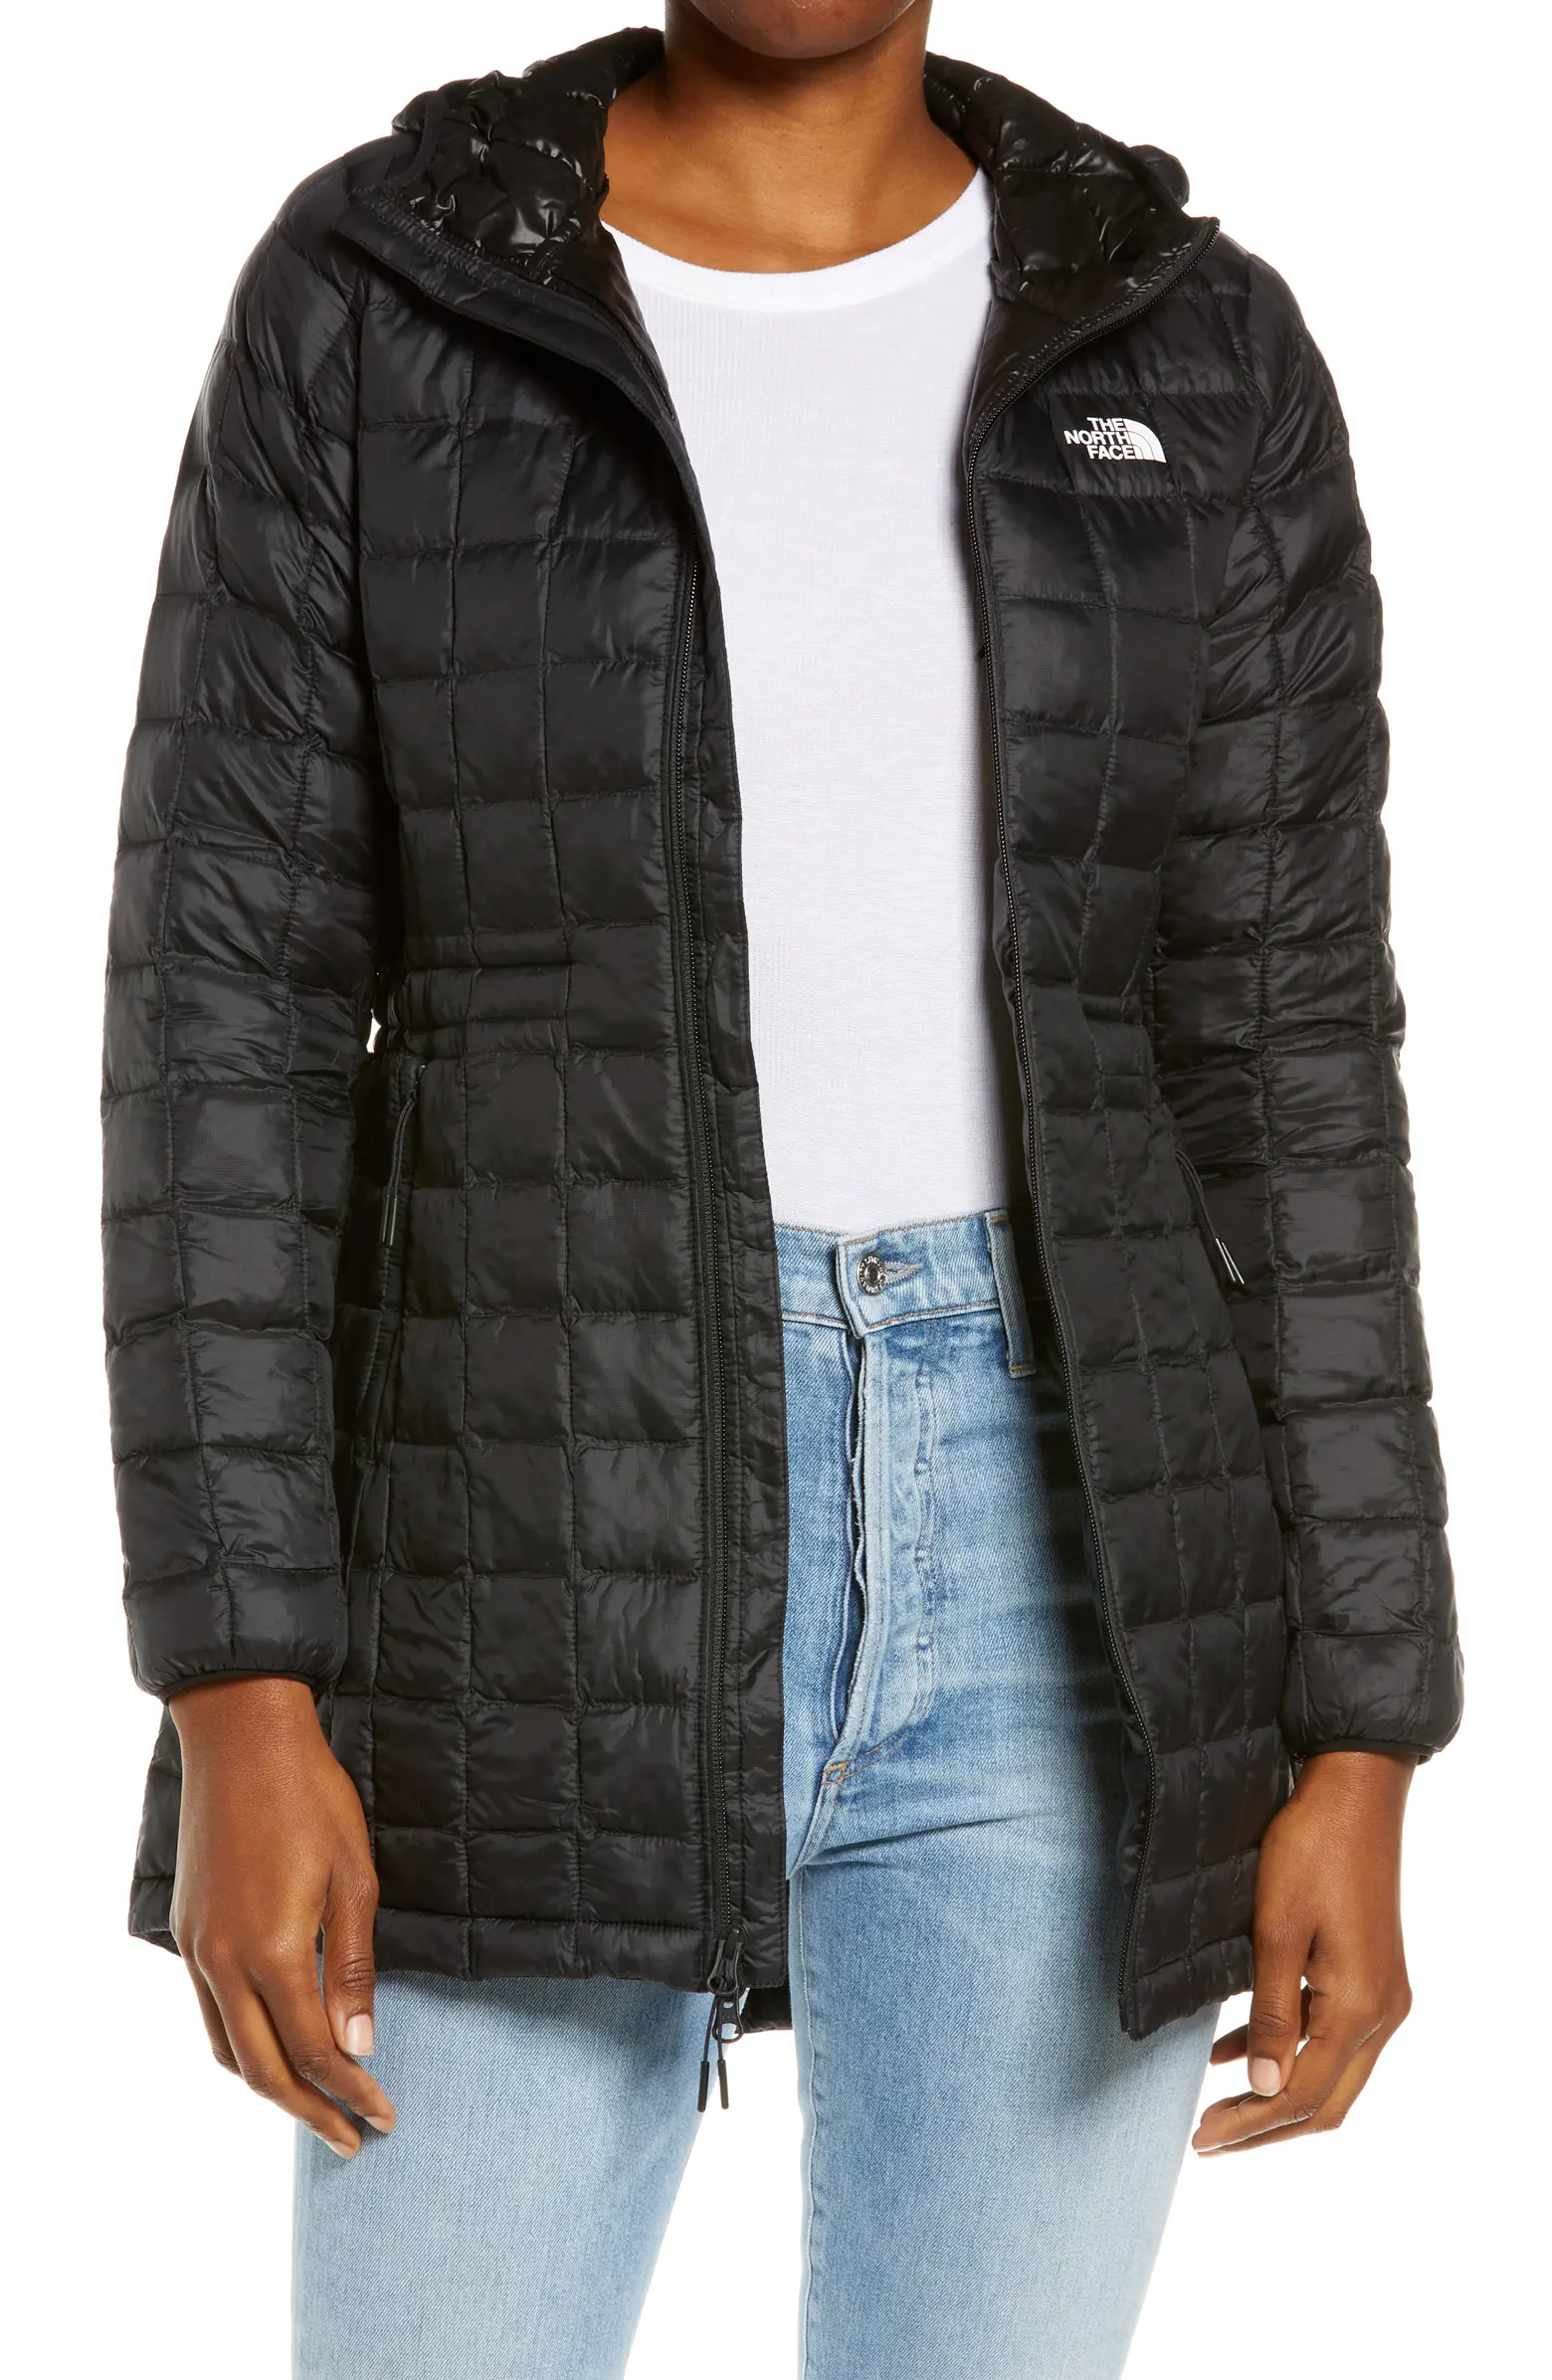 Black puffer jacket over white shirt and jeans 